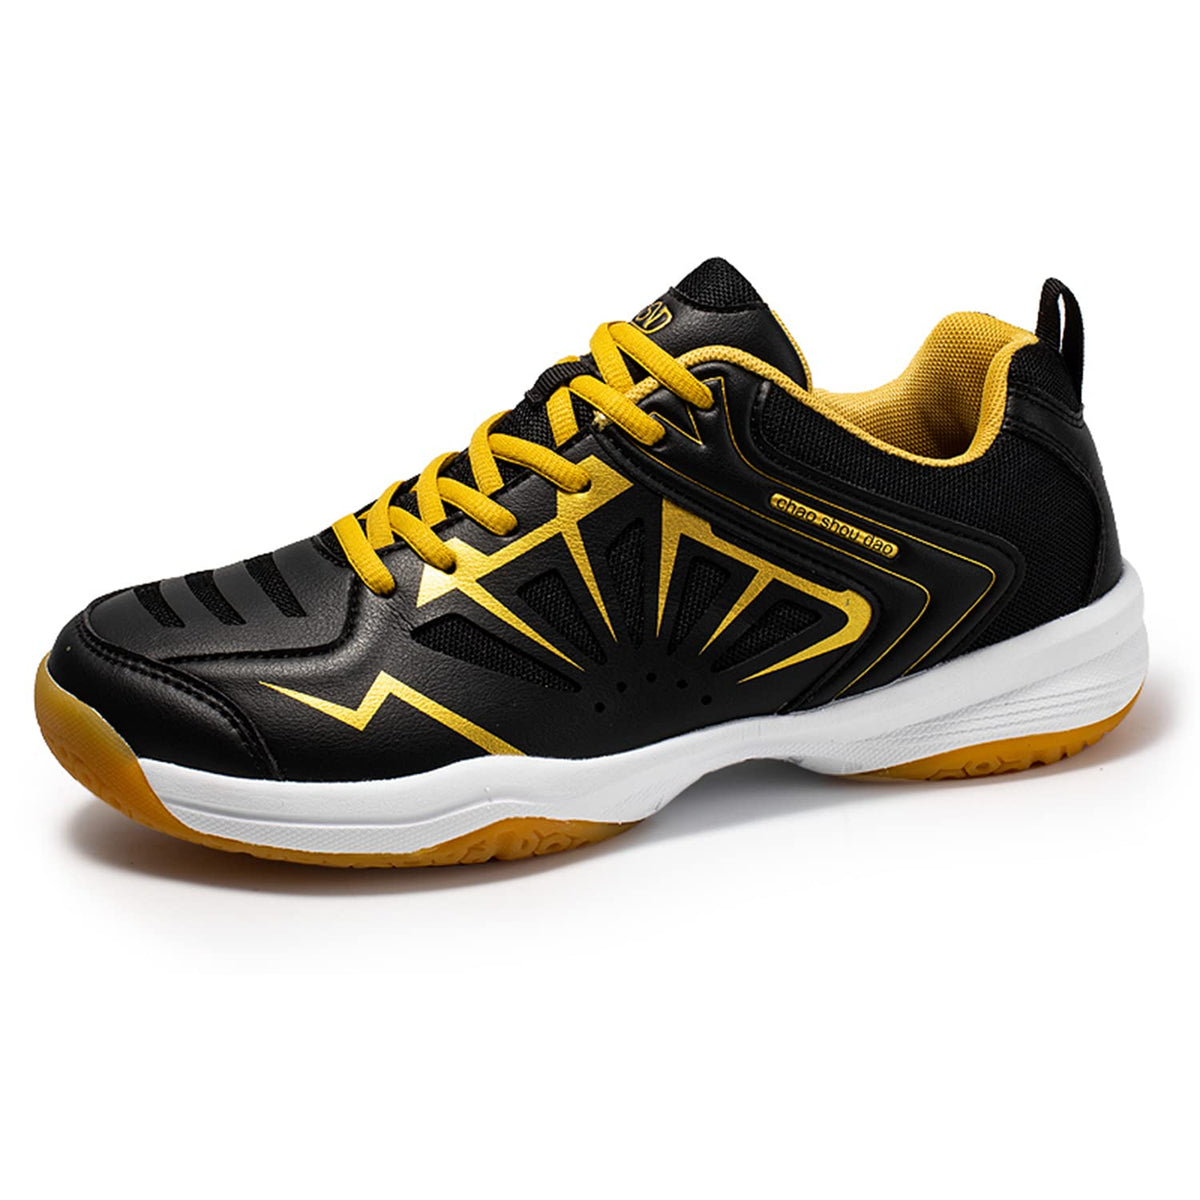 Eribby Mens Breathable Badminton Shoes for Youth, Big Kids and Men Black